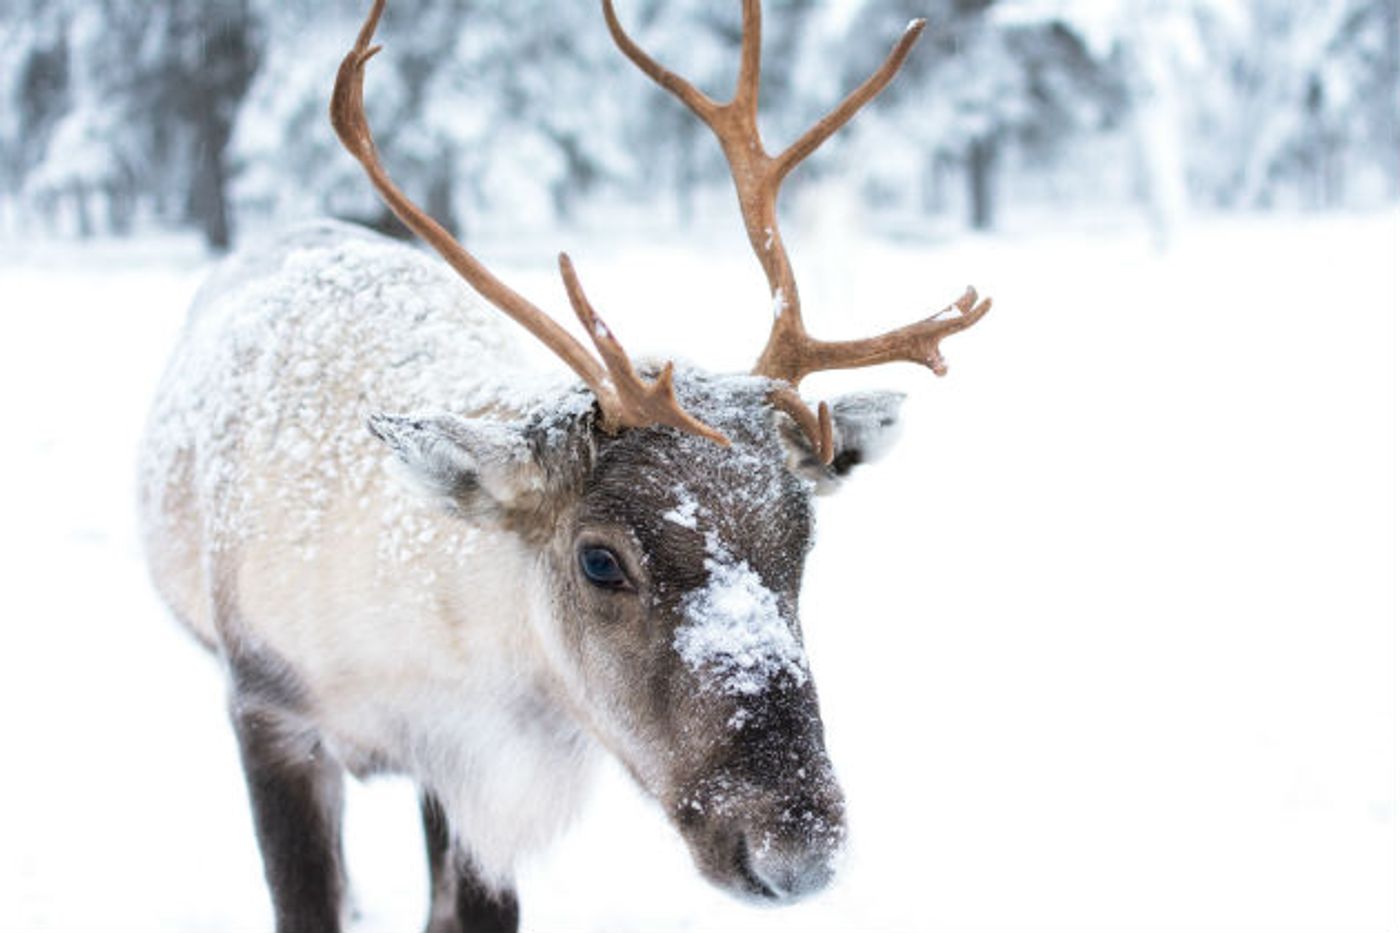 Reindeer are reportedly shrinking in size due to climate change.